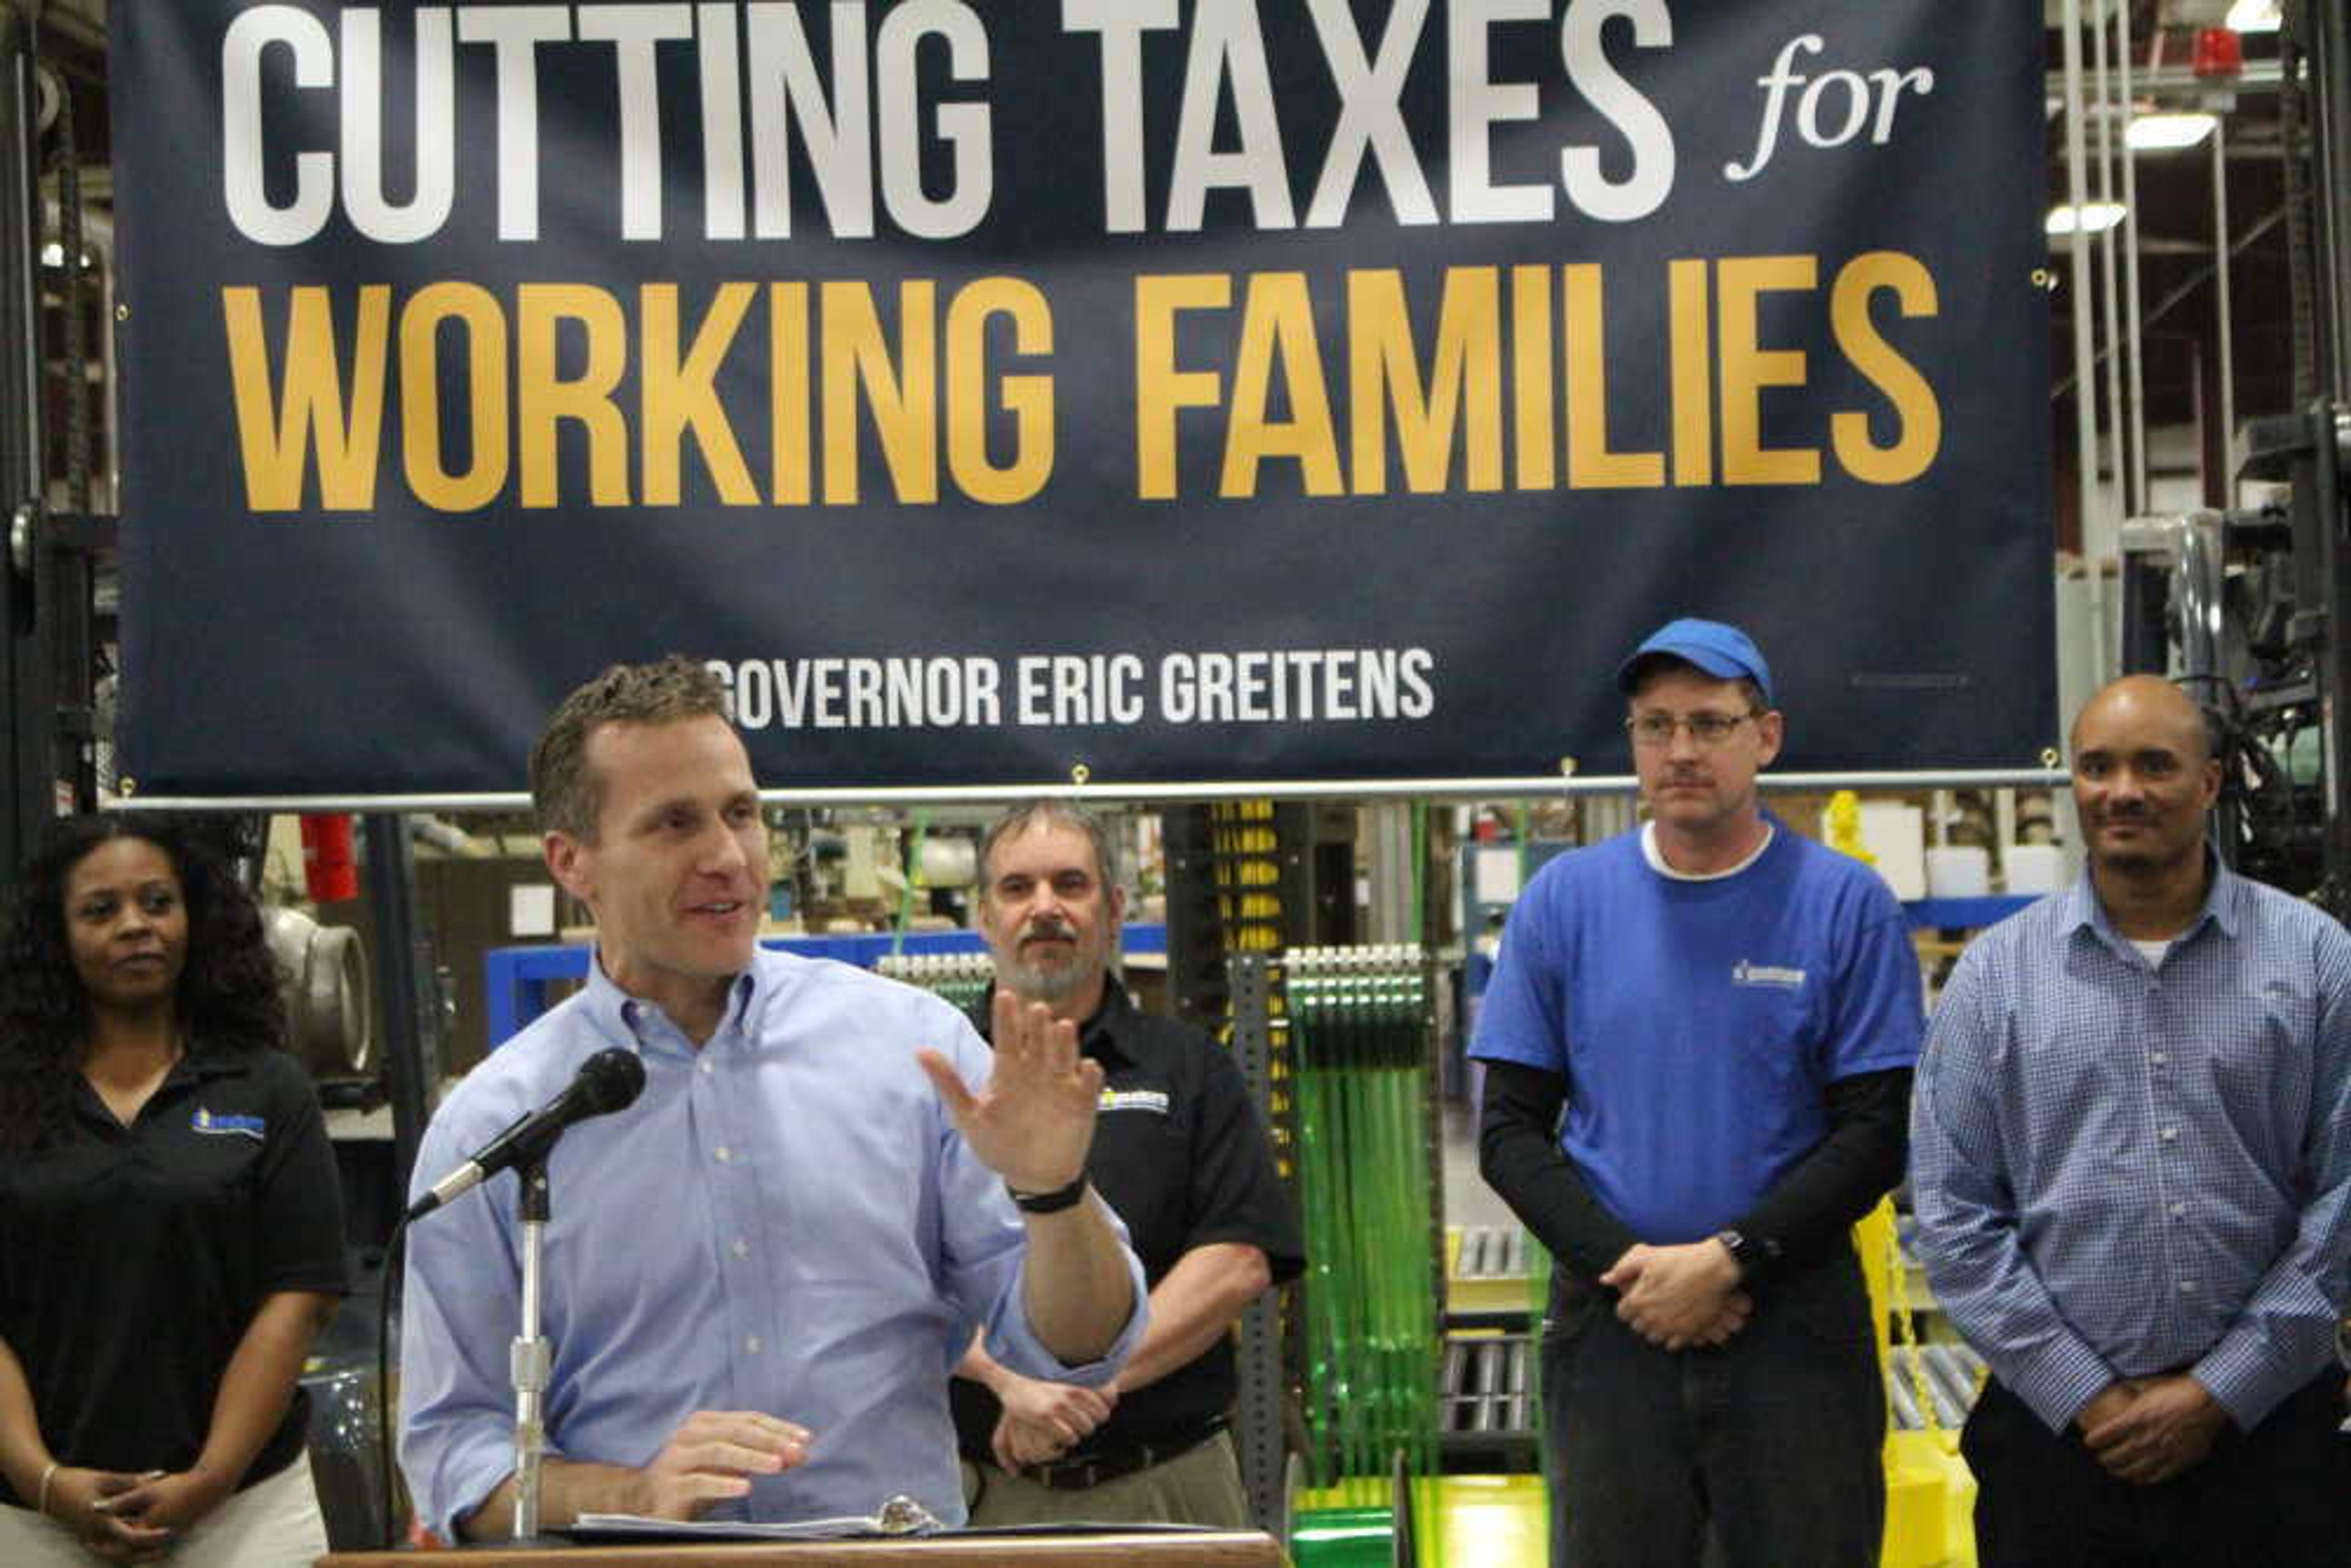 Gov. Eric Greitens made a public appearance in Jackson to discuss his new tax plan back on January 29.